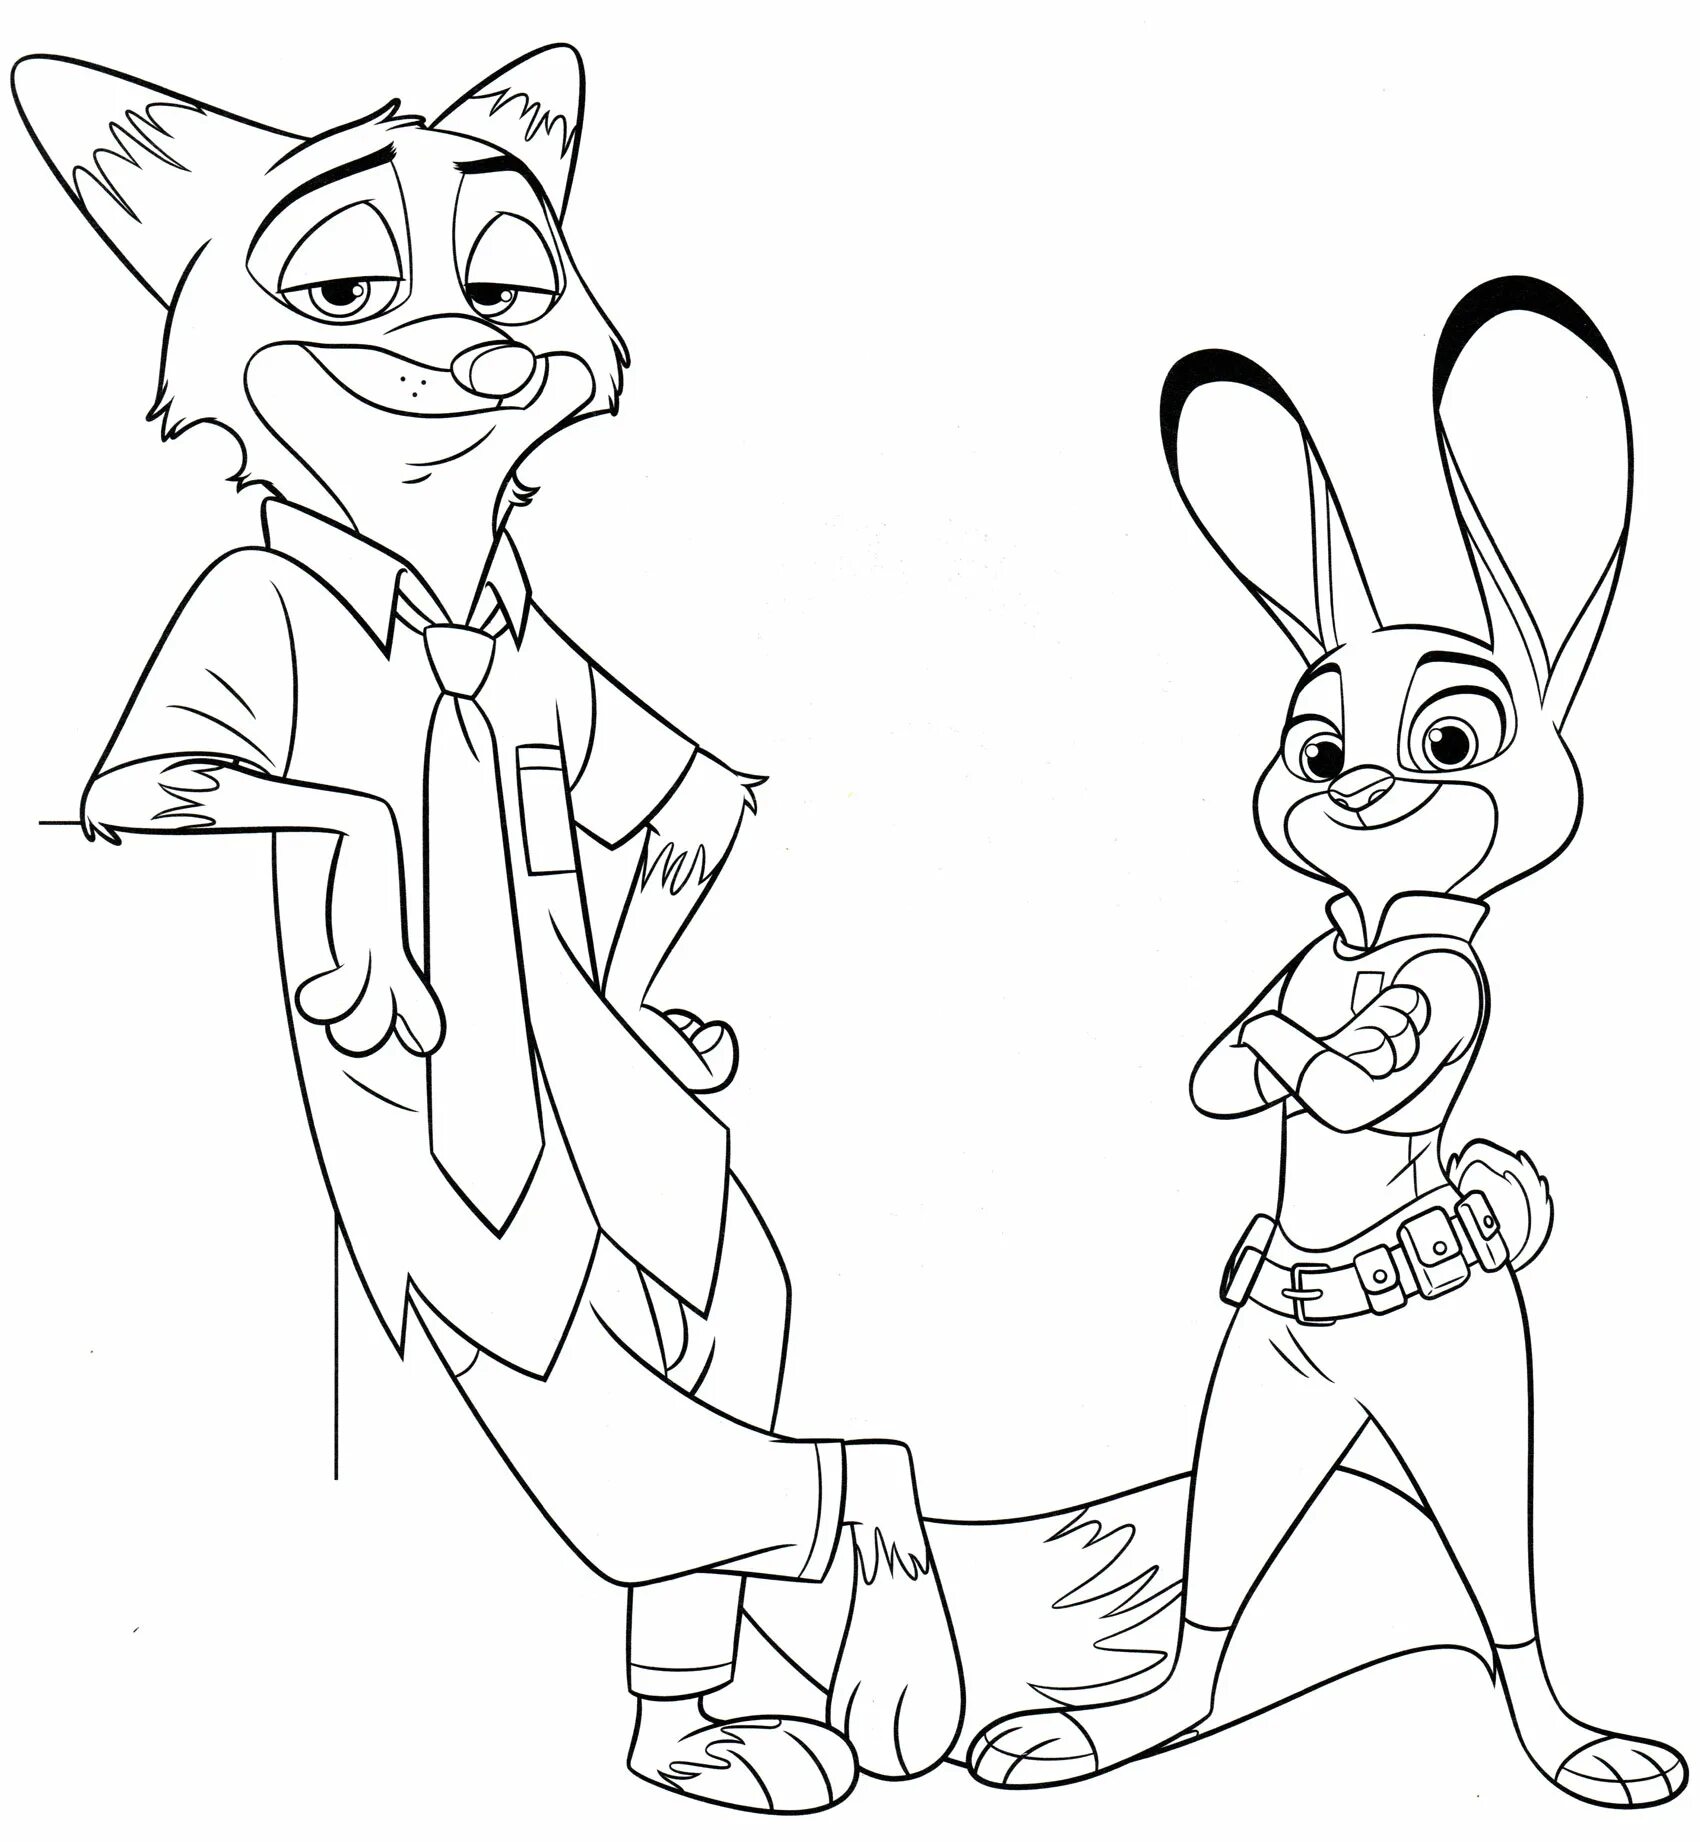 Agile coloring page bunny from zootopia